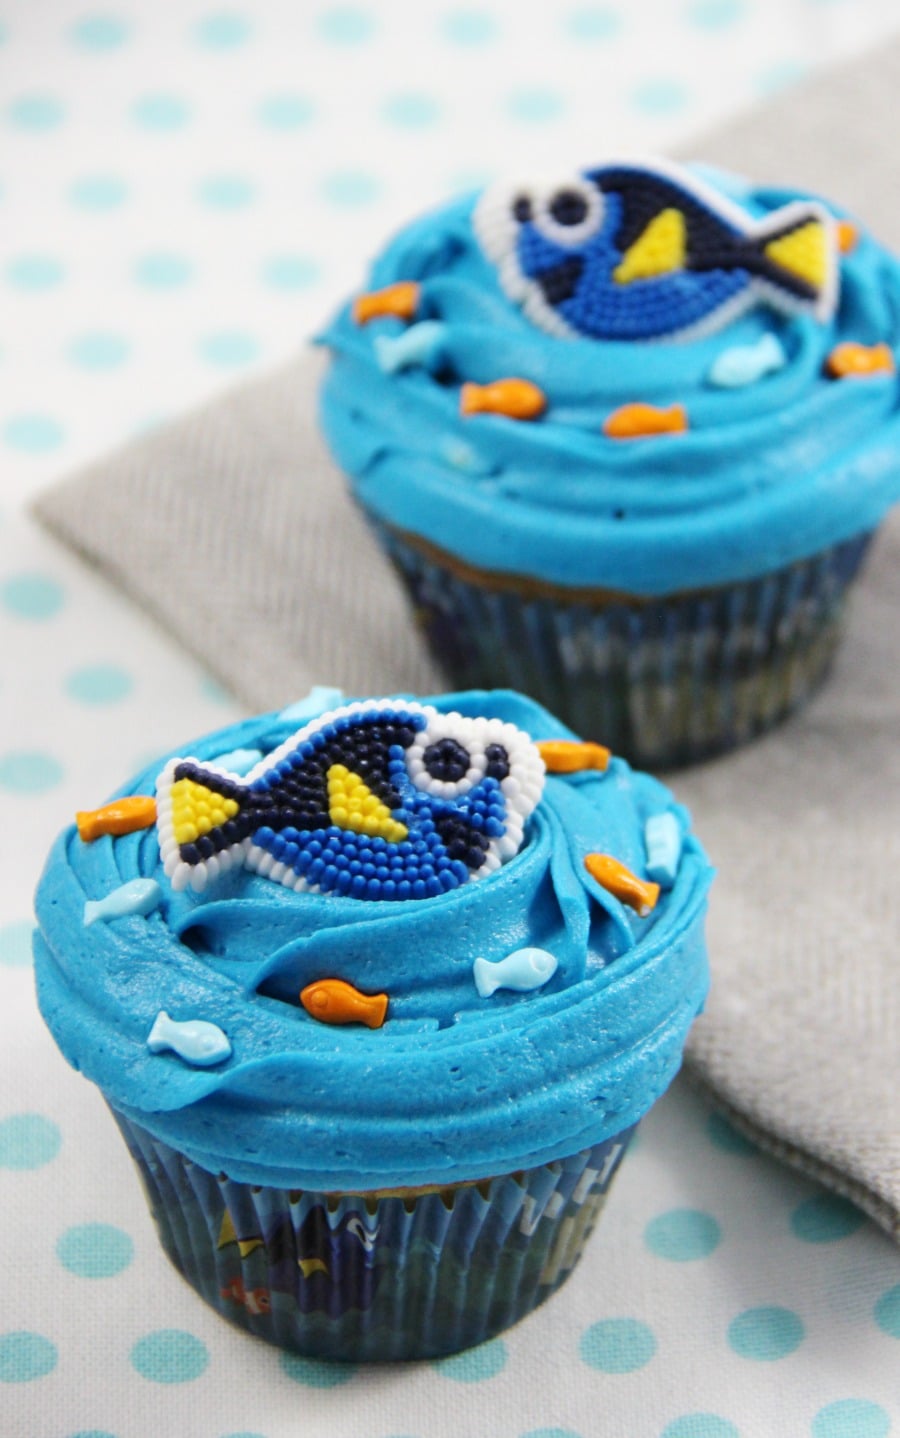 Finding Dory Cupcakes 